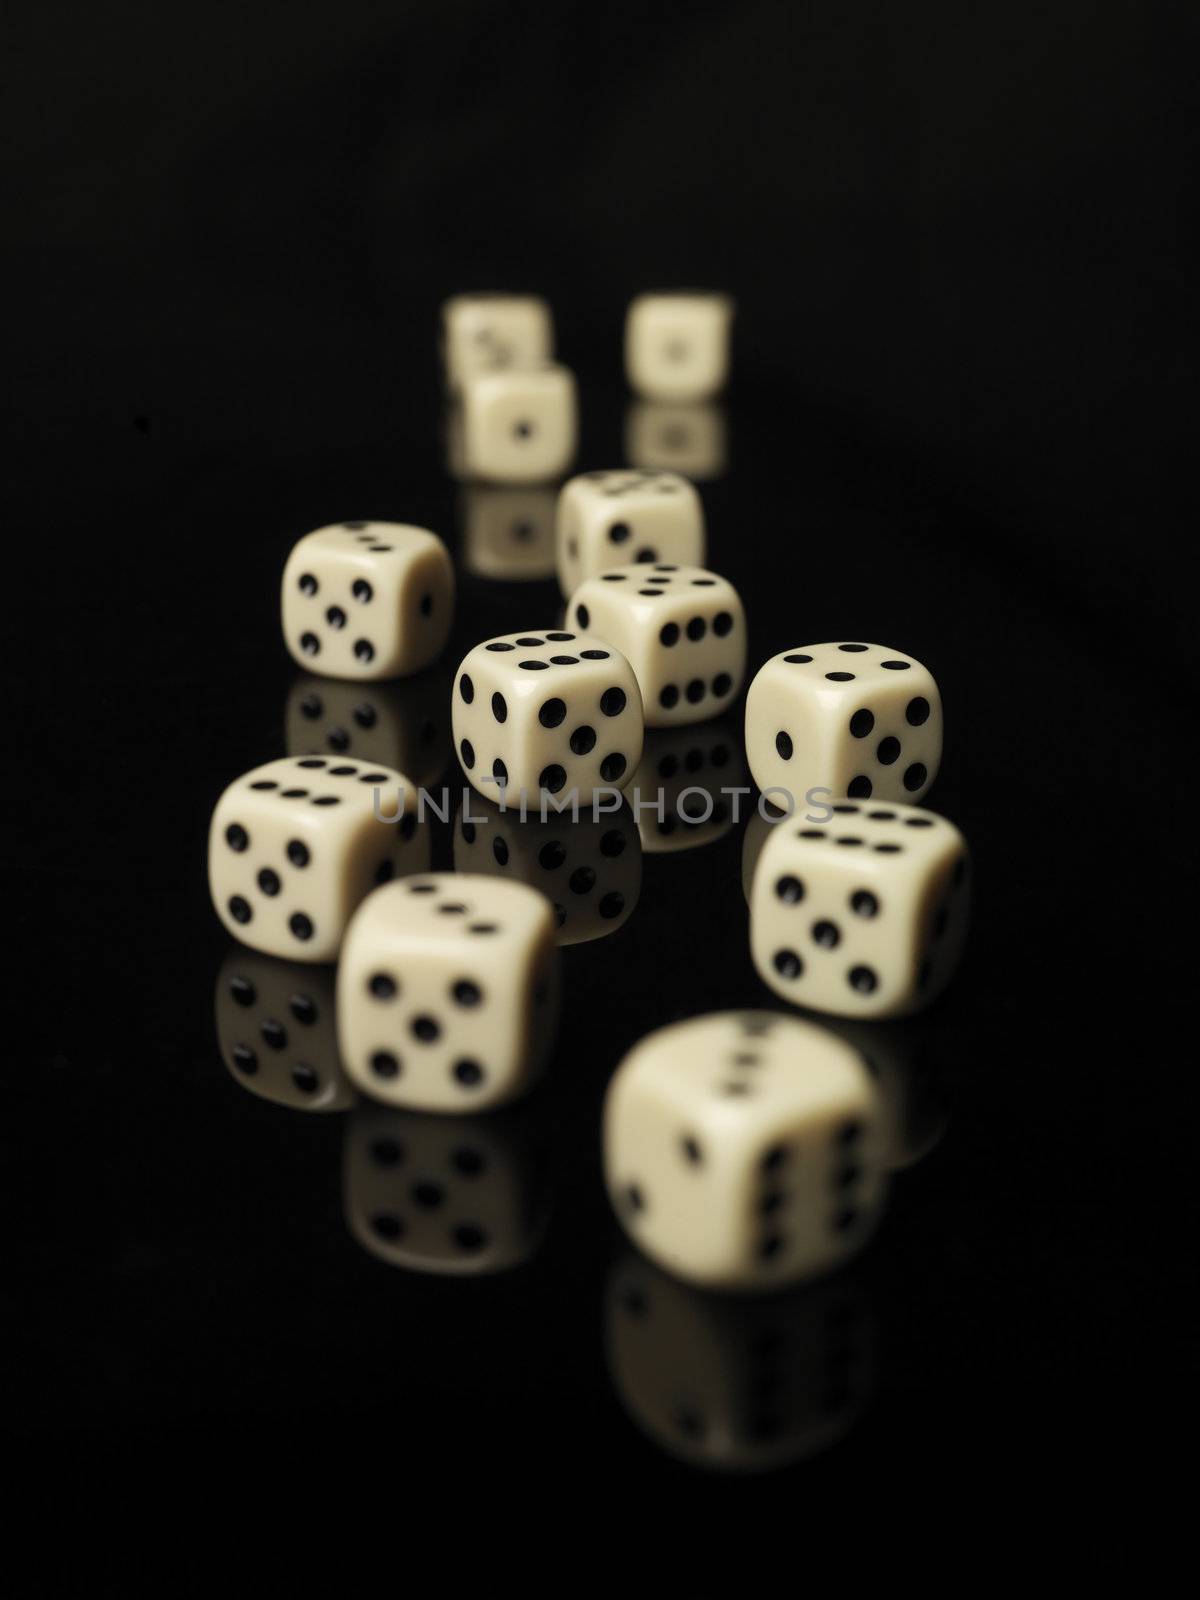 Rolled dices by gemenacom